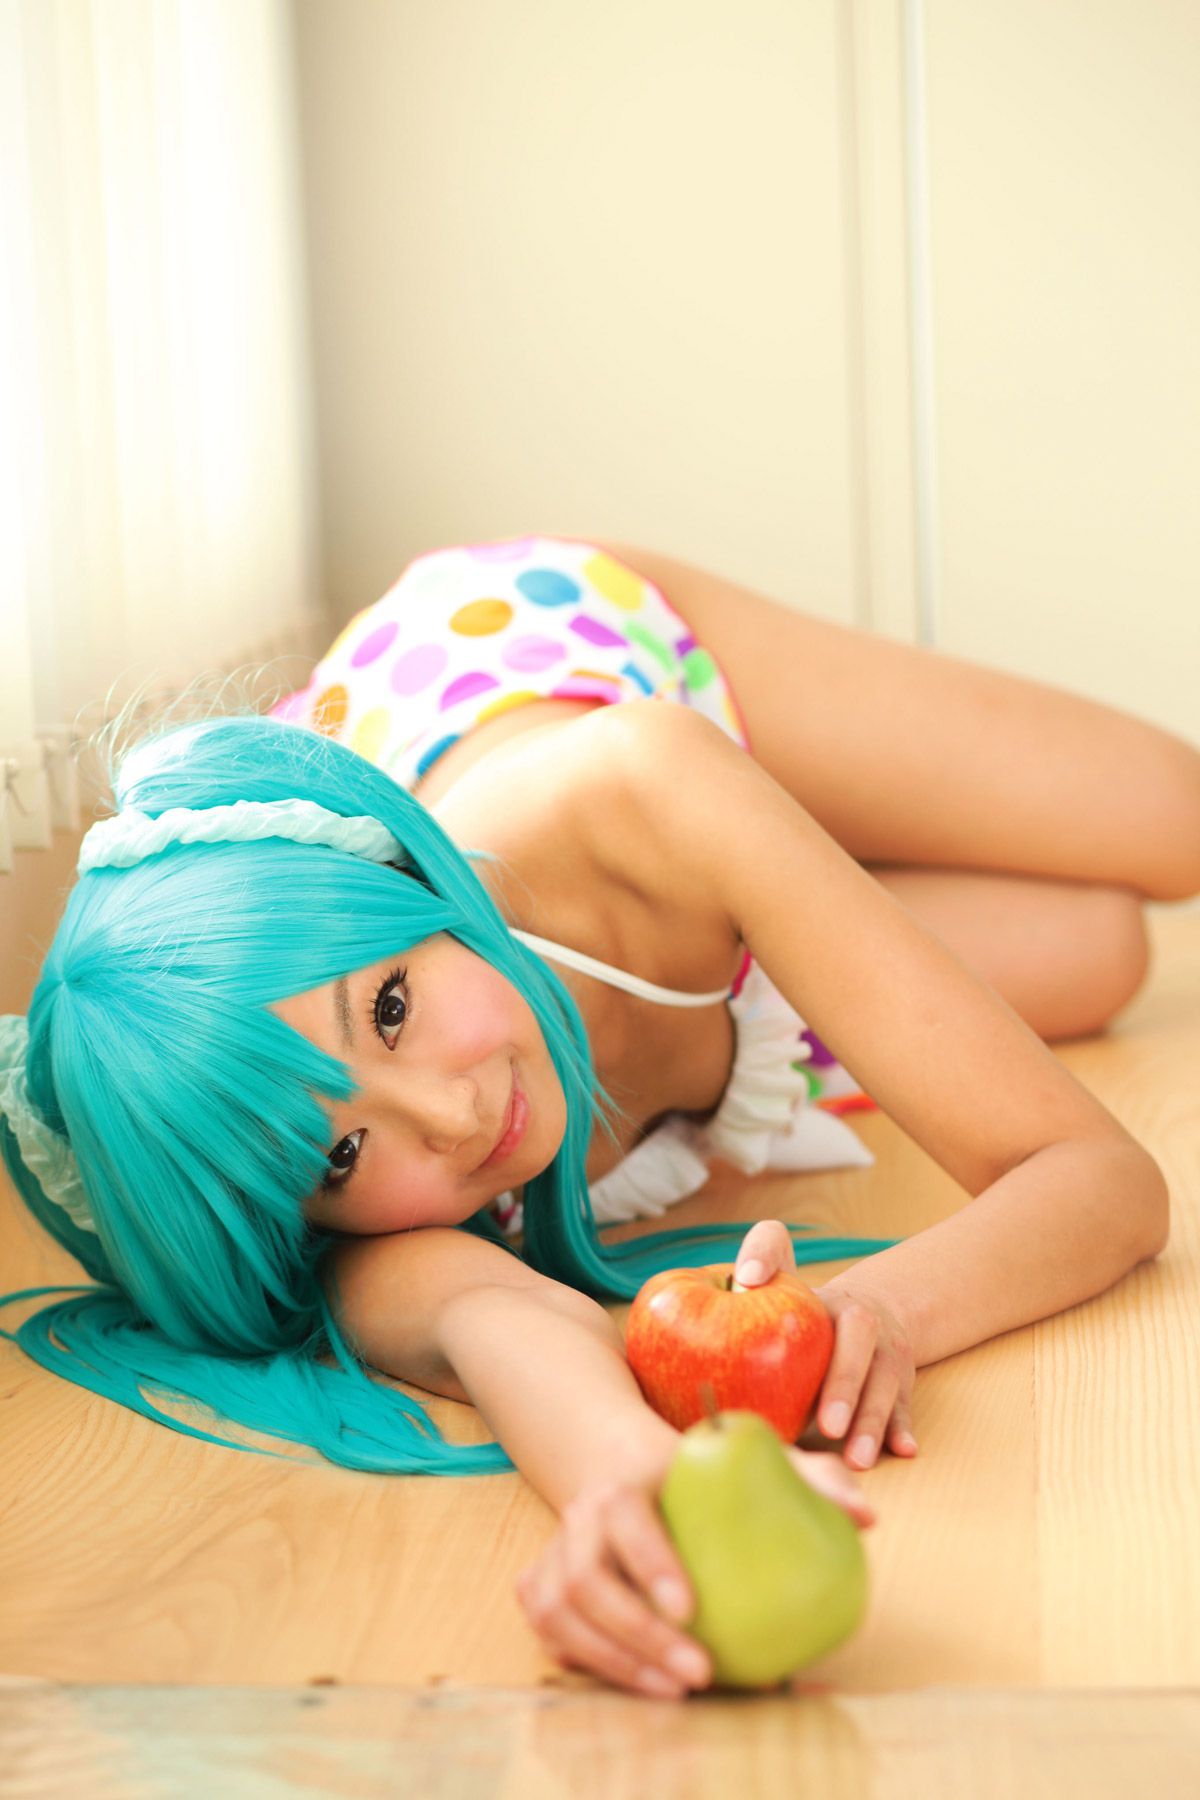 taotuhome[Cosplay] Necoco as Hatsune Miku from Vocaloid 套图第24张